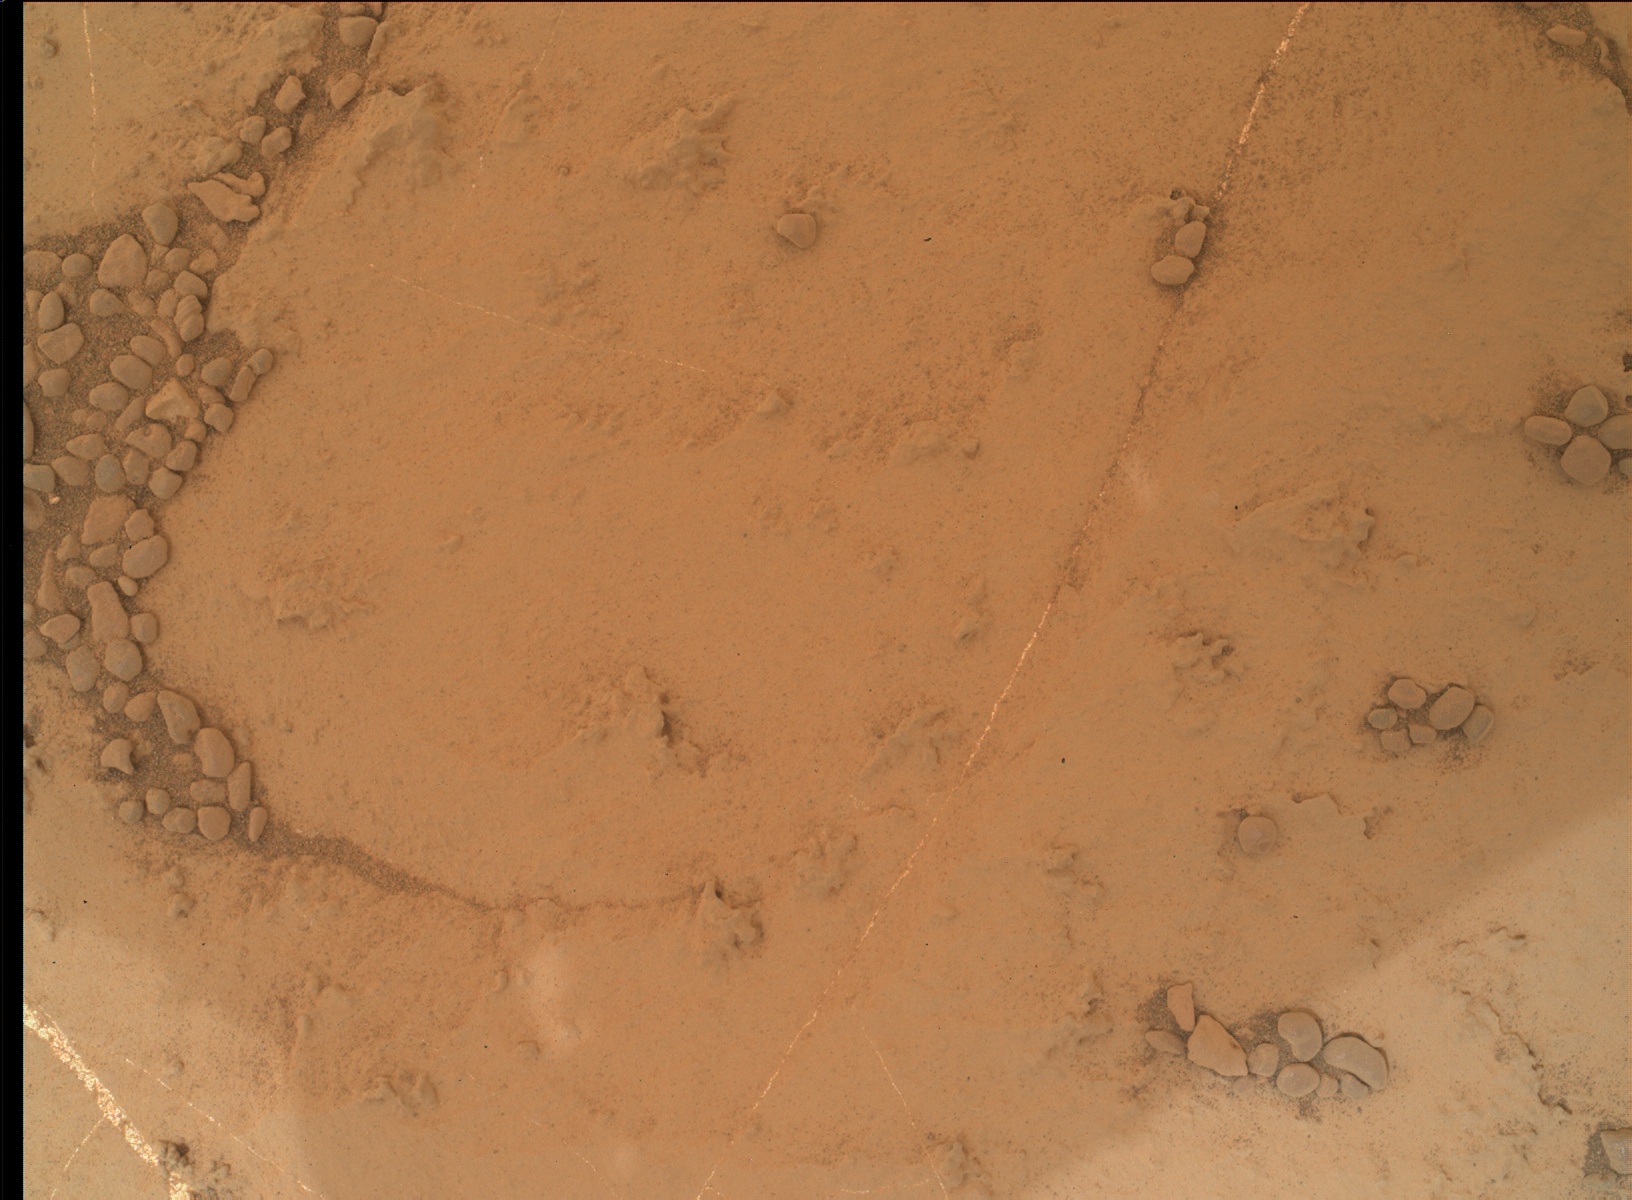 Nasa's Mars rover Curiosity acquired this image using its Mars Hand Lens Imager (MAHLI) on Sol 2136